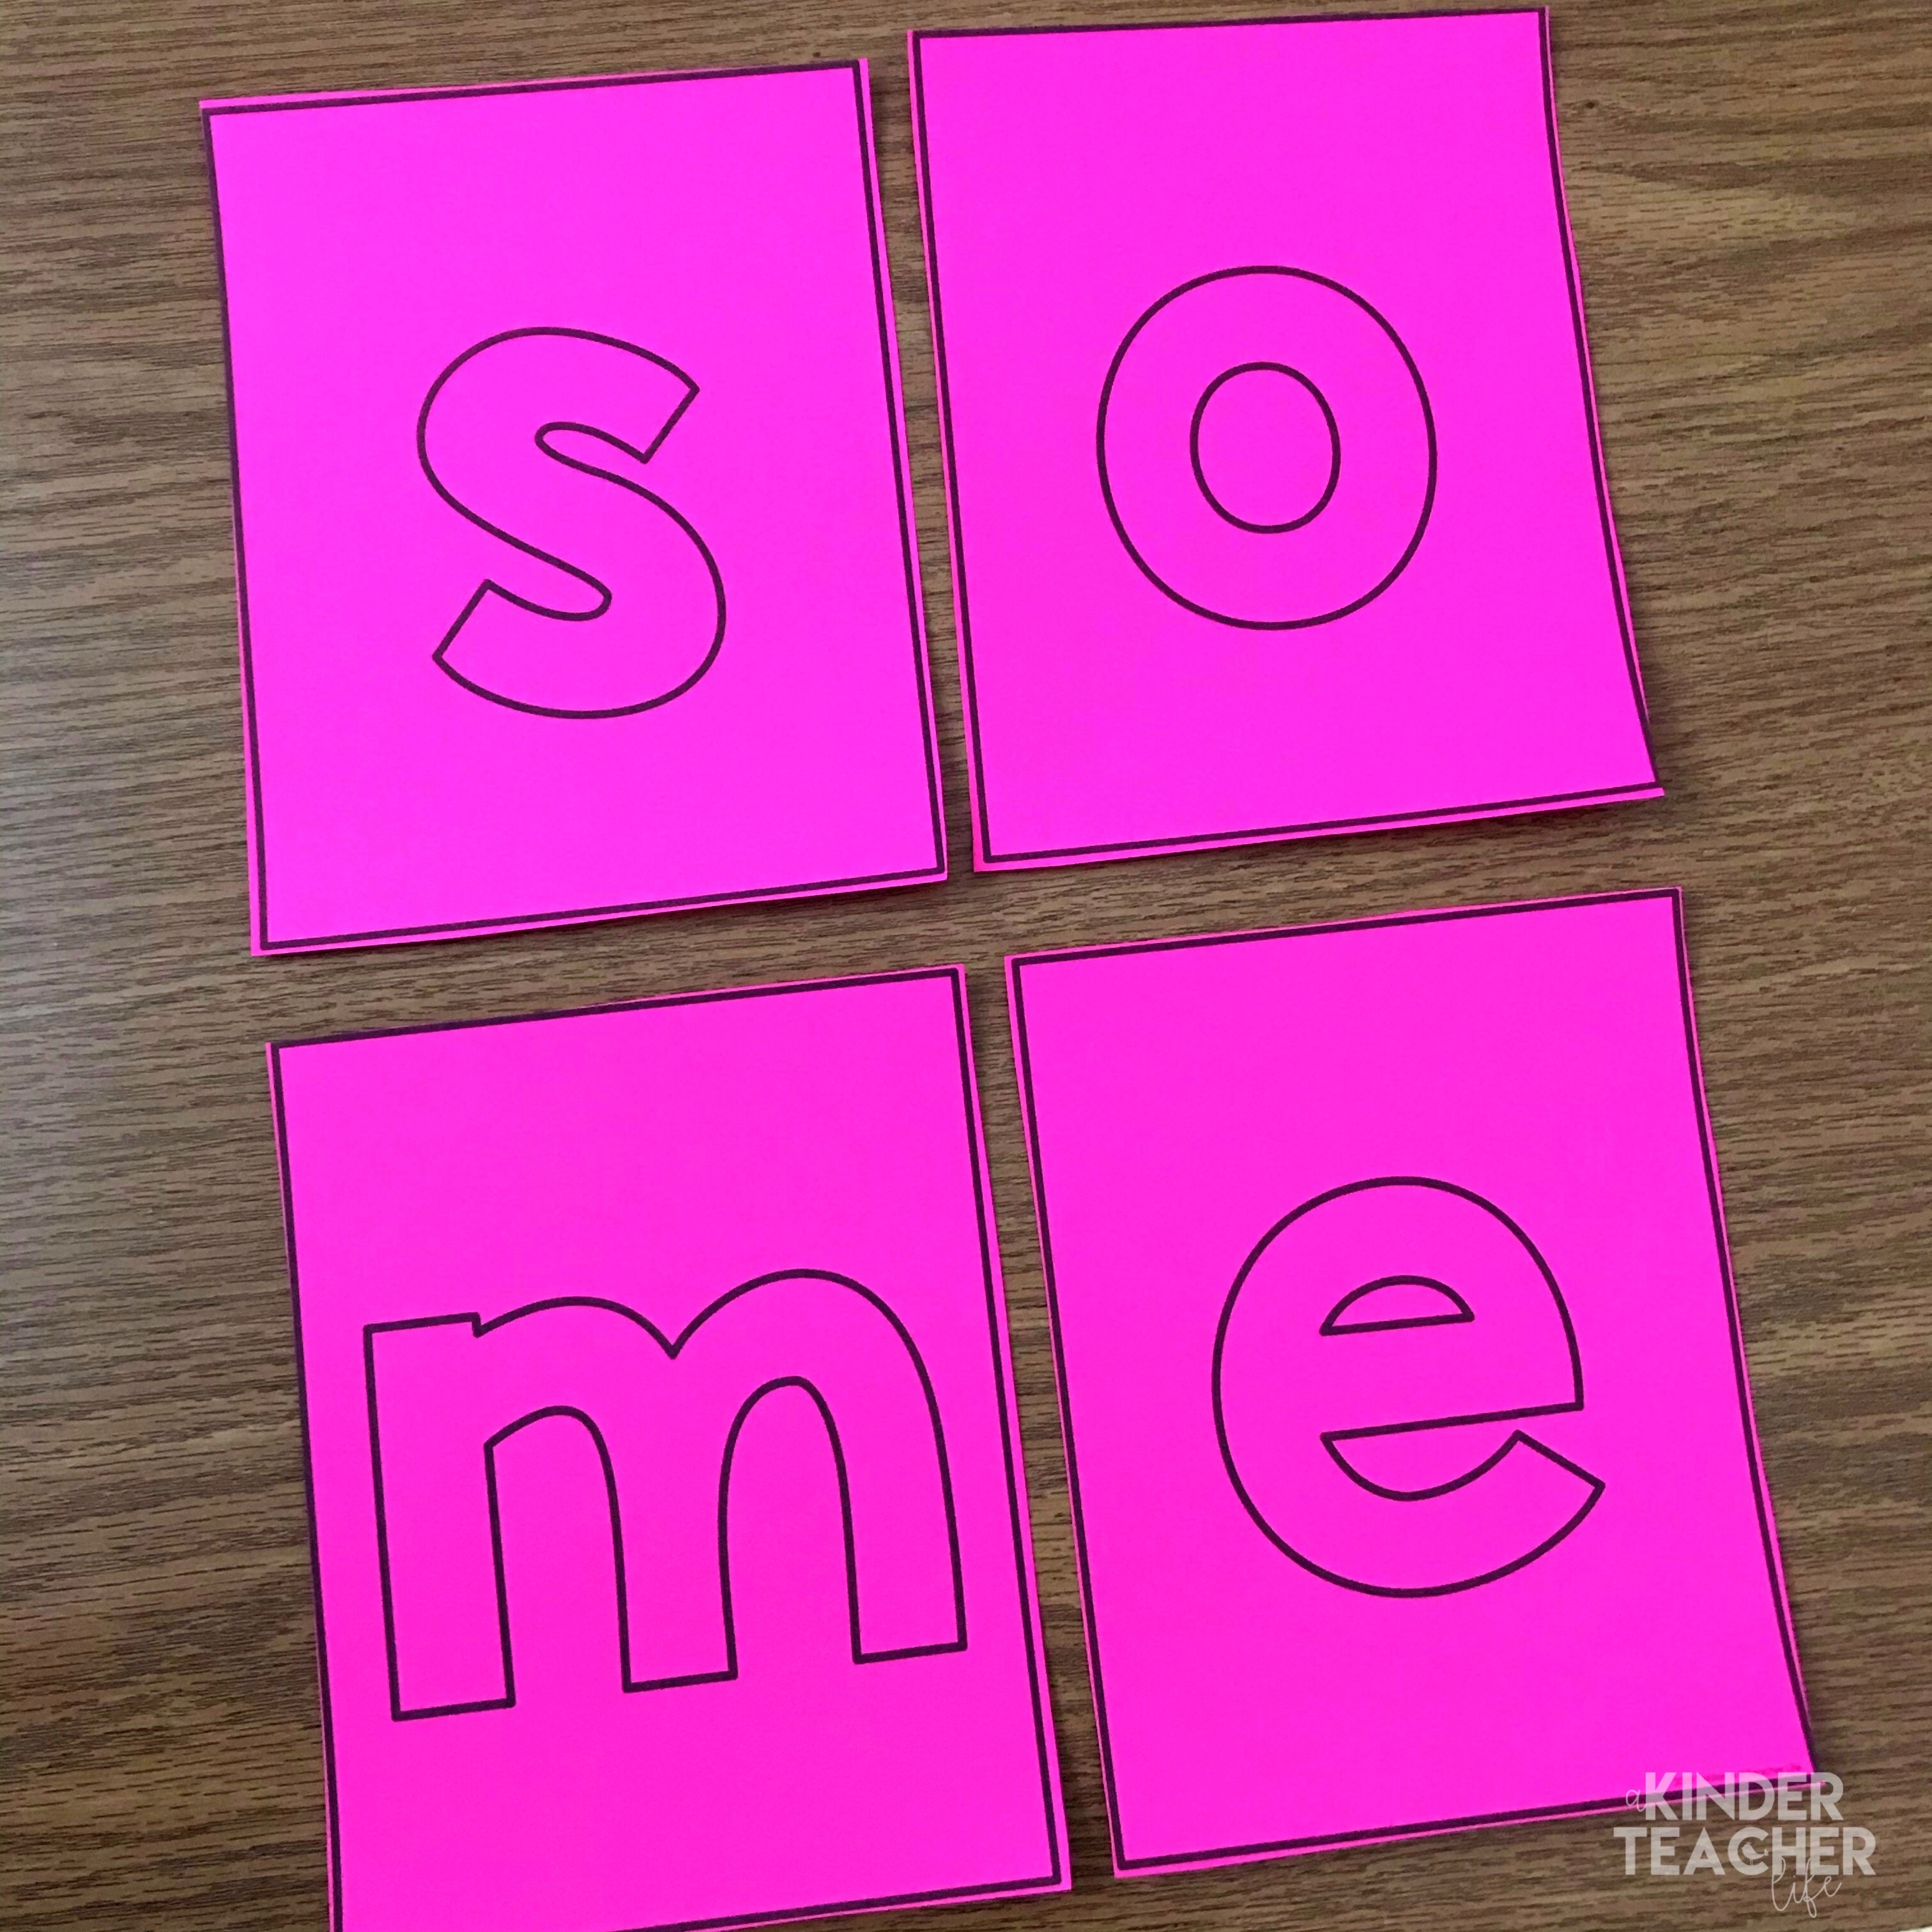 Sight word activity - build the sight word using letter cards